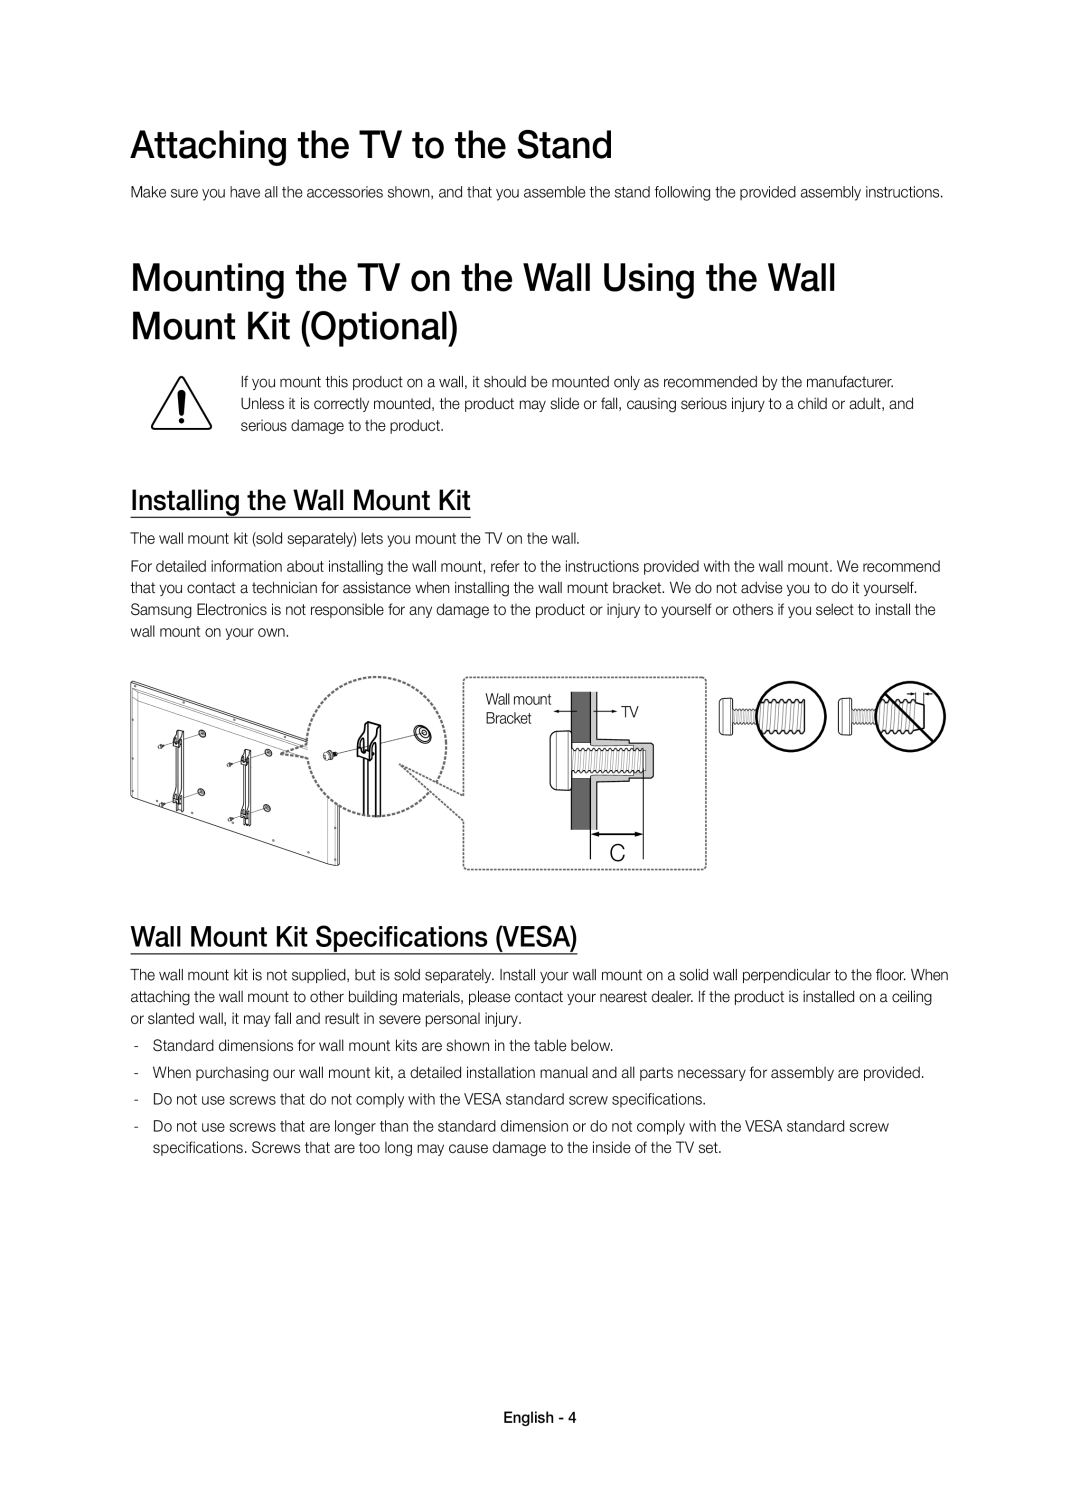 Samsung UE48H6600SVXZG manual Attaching the TV to the Stand, Mounting the TV on the Wall Using the Wall Mount Kit Optional 